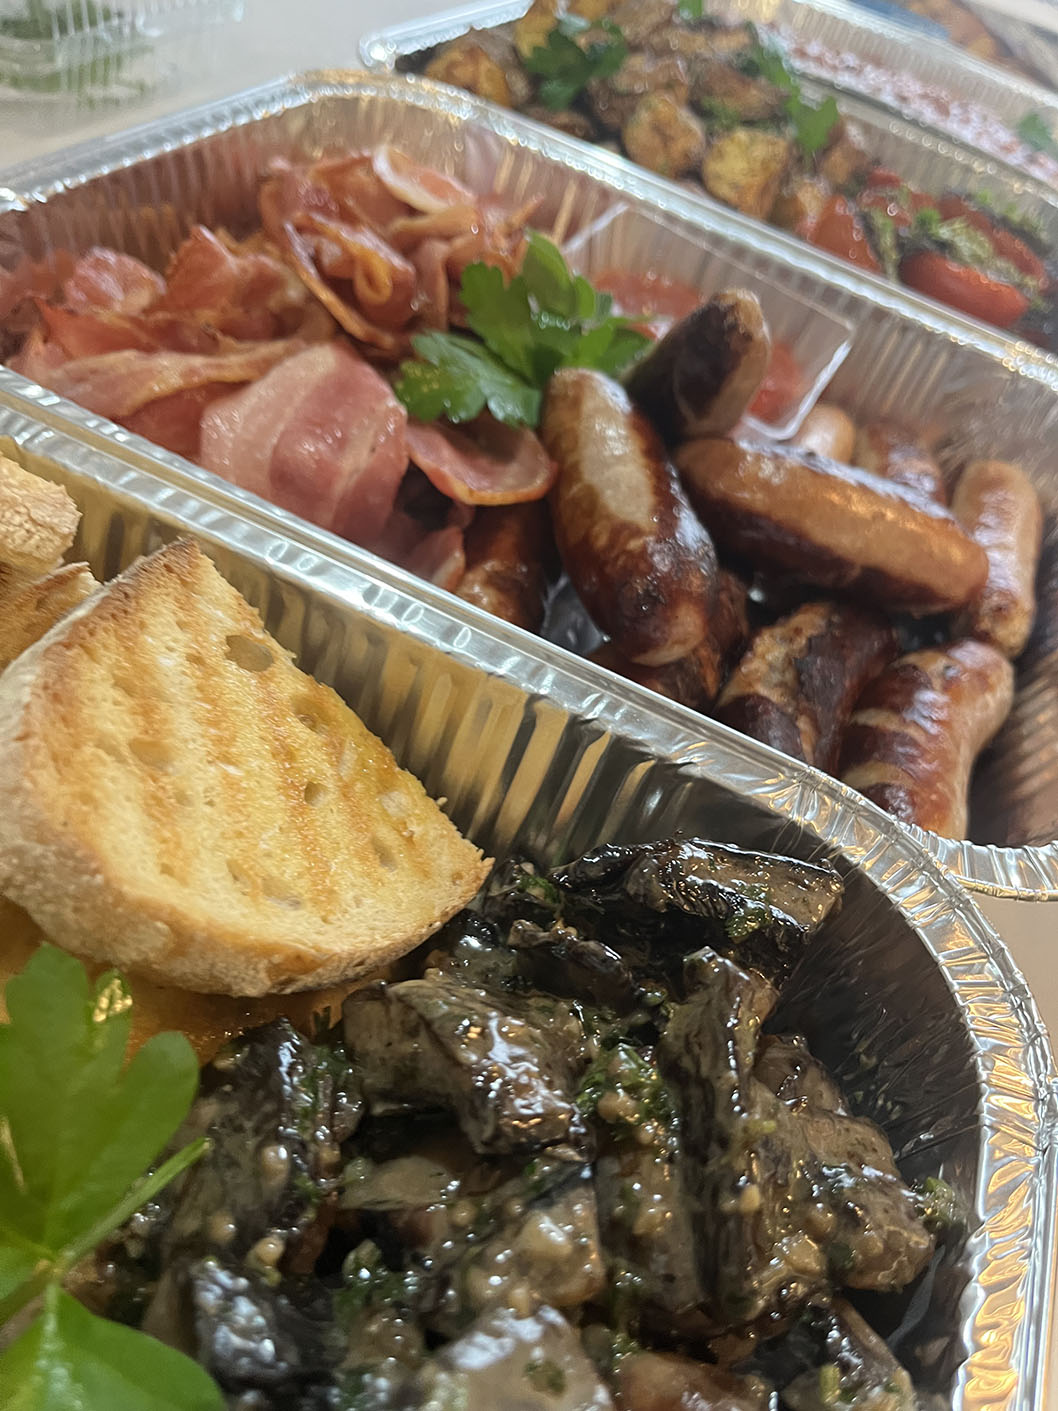 Cooked breakfast platter - sausages, bacon, potatoes, beans, tomatoes, mushrooms and toast